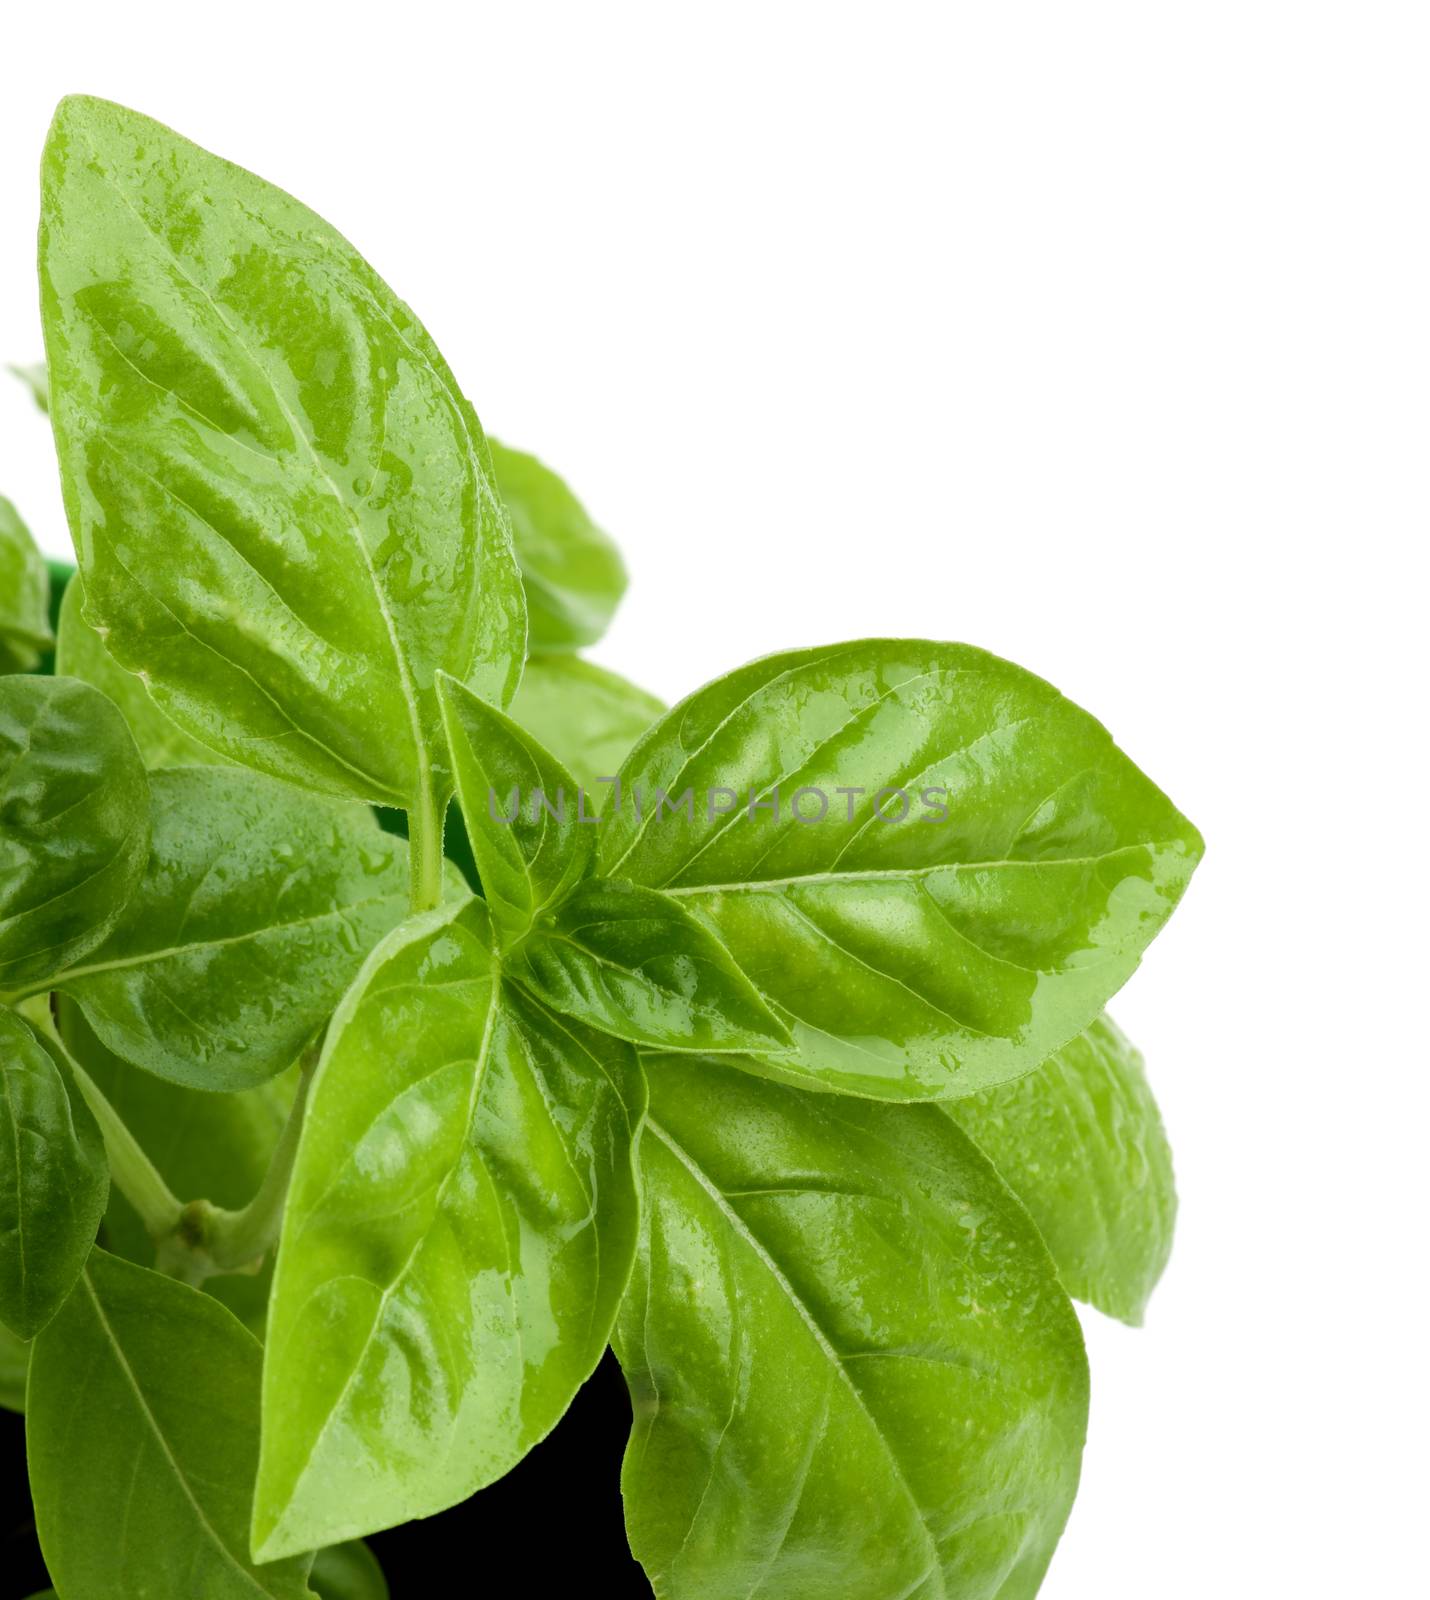 Leafs of Fresh Green Lush Foliage Basil with Water Drops Cross Section on White background